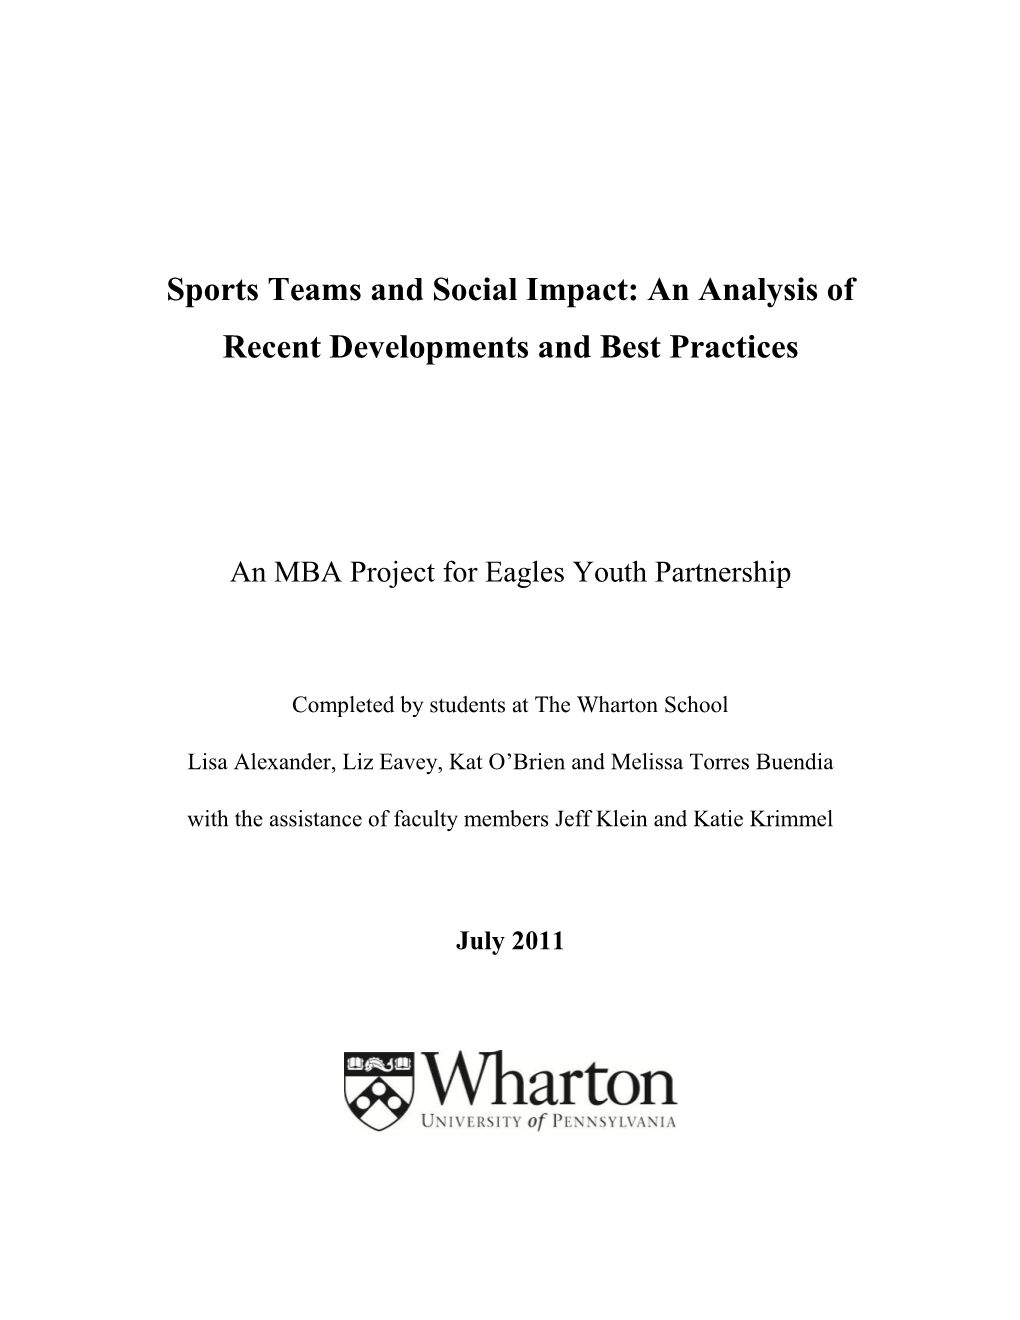 Social Impact of Sports Report